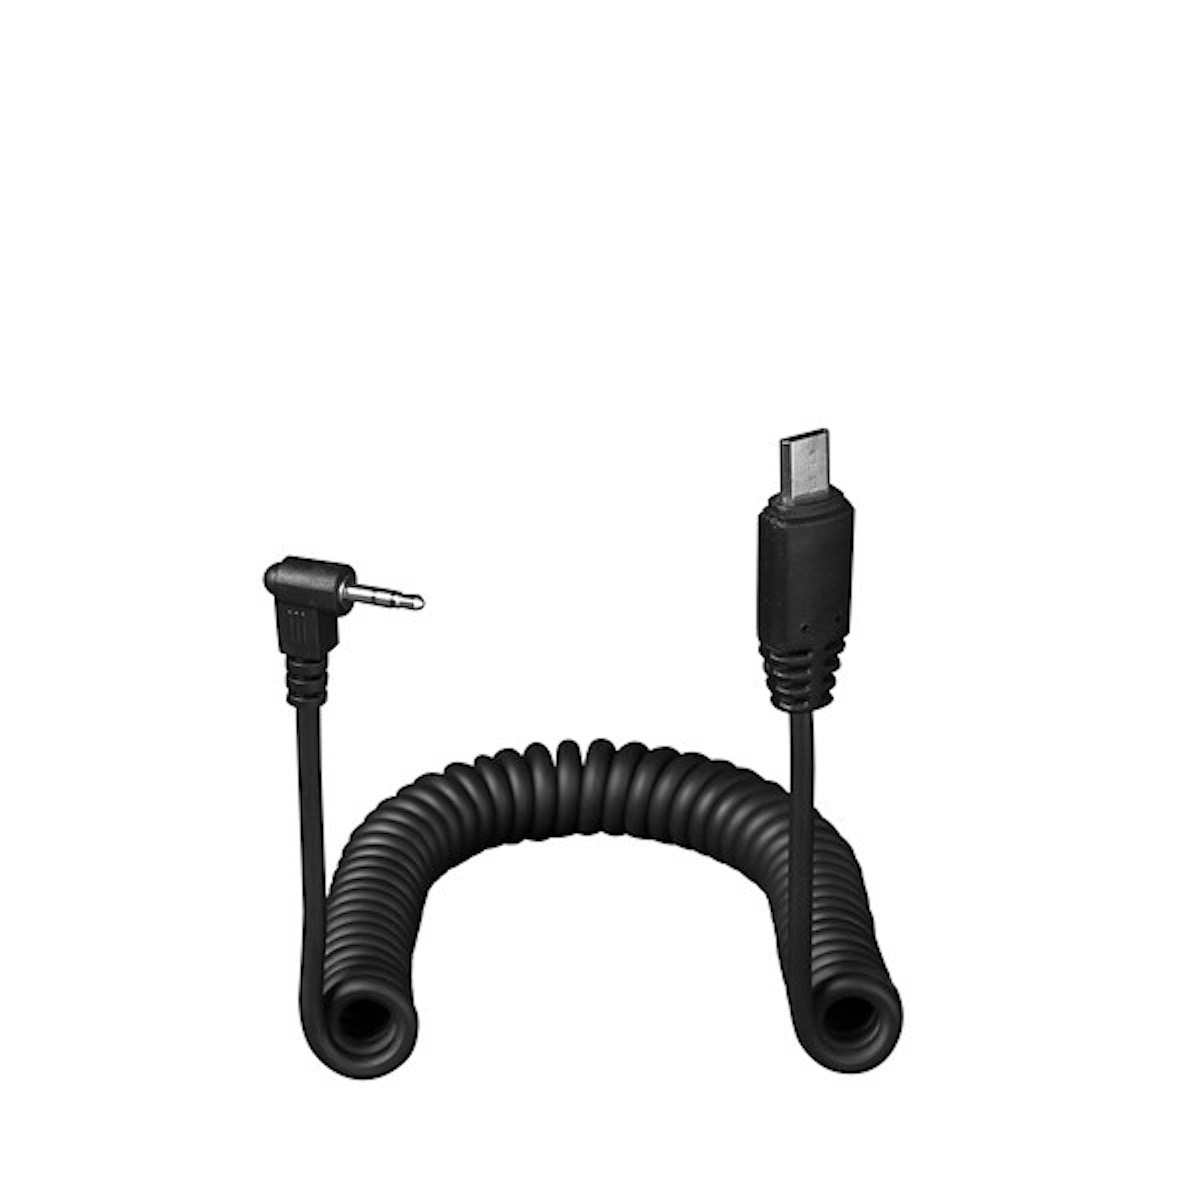 Manfrotto Syrp 2S Link Kabel